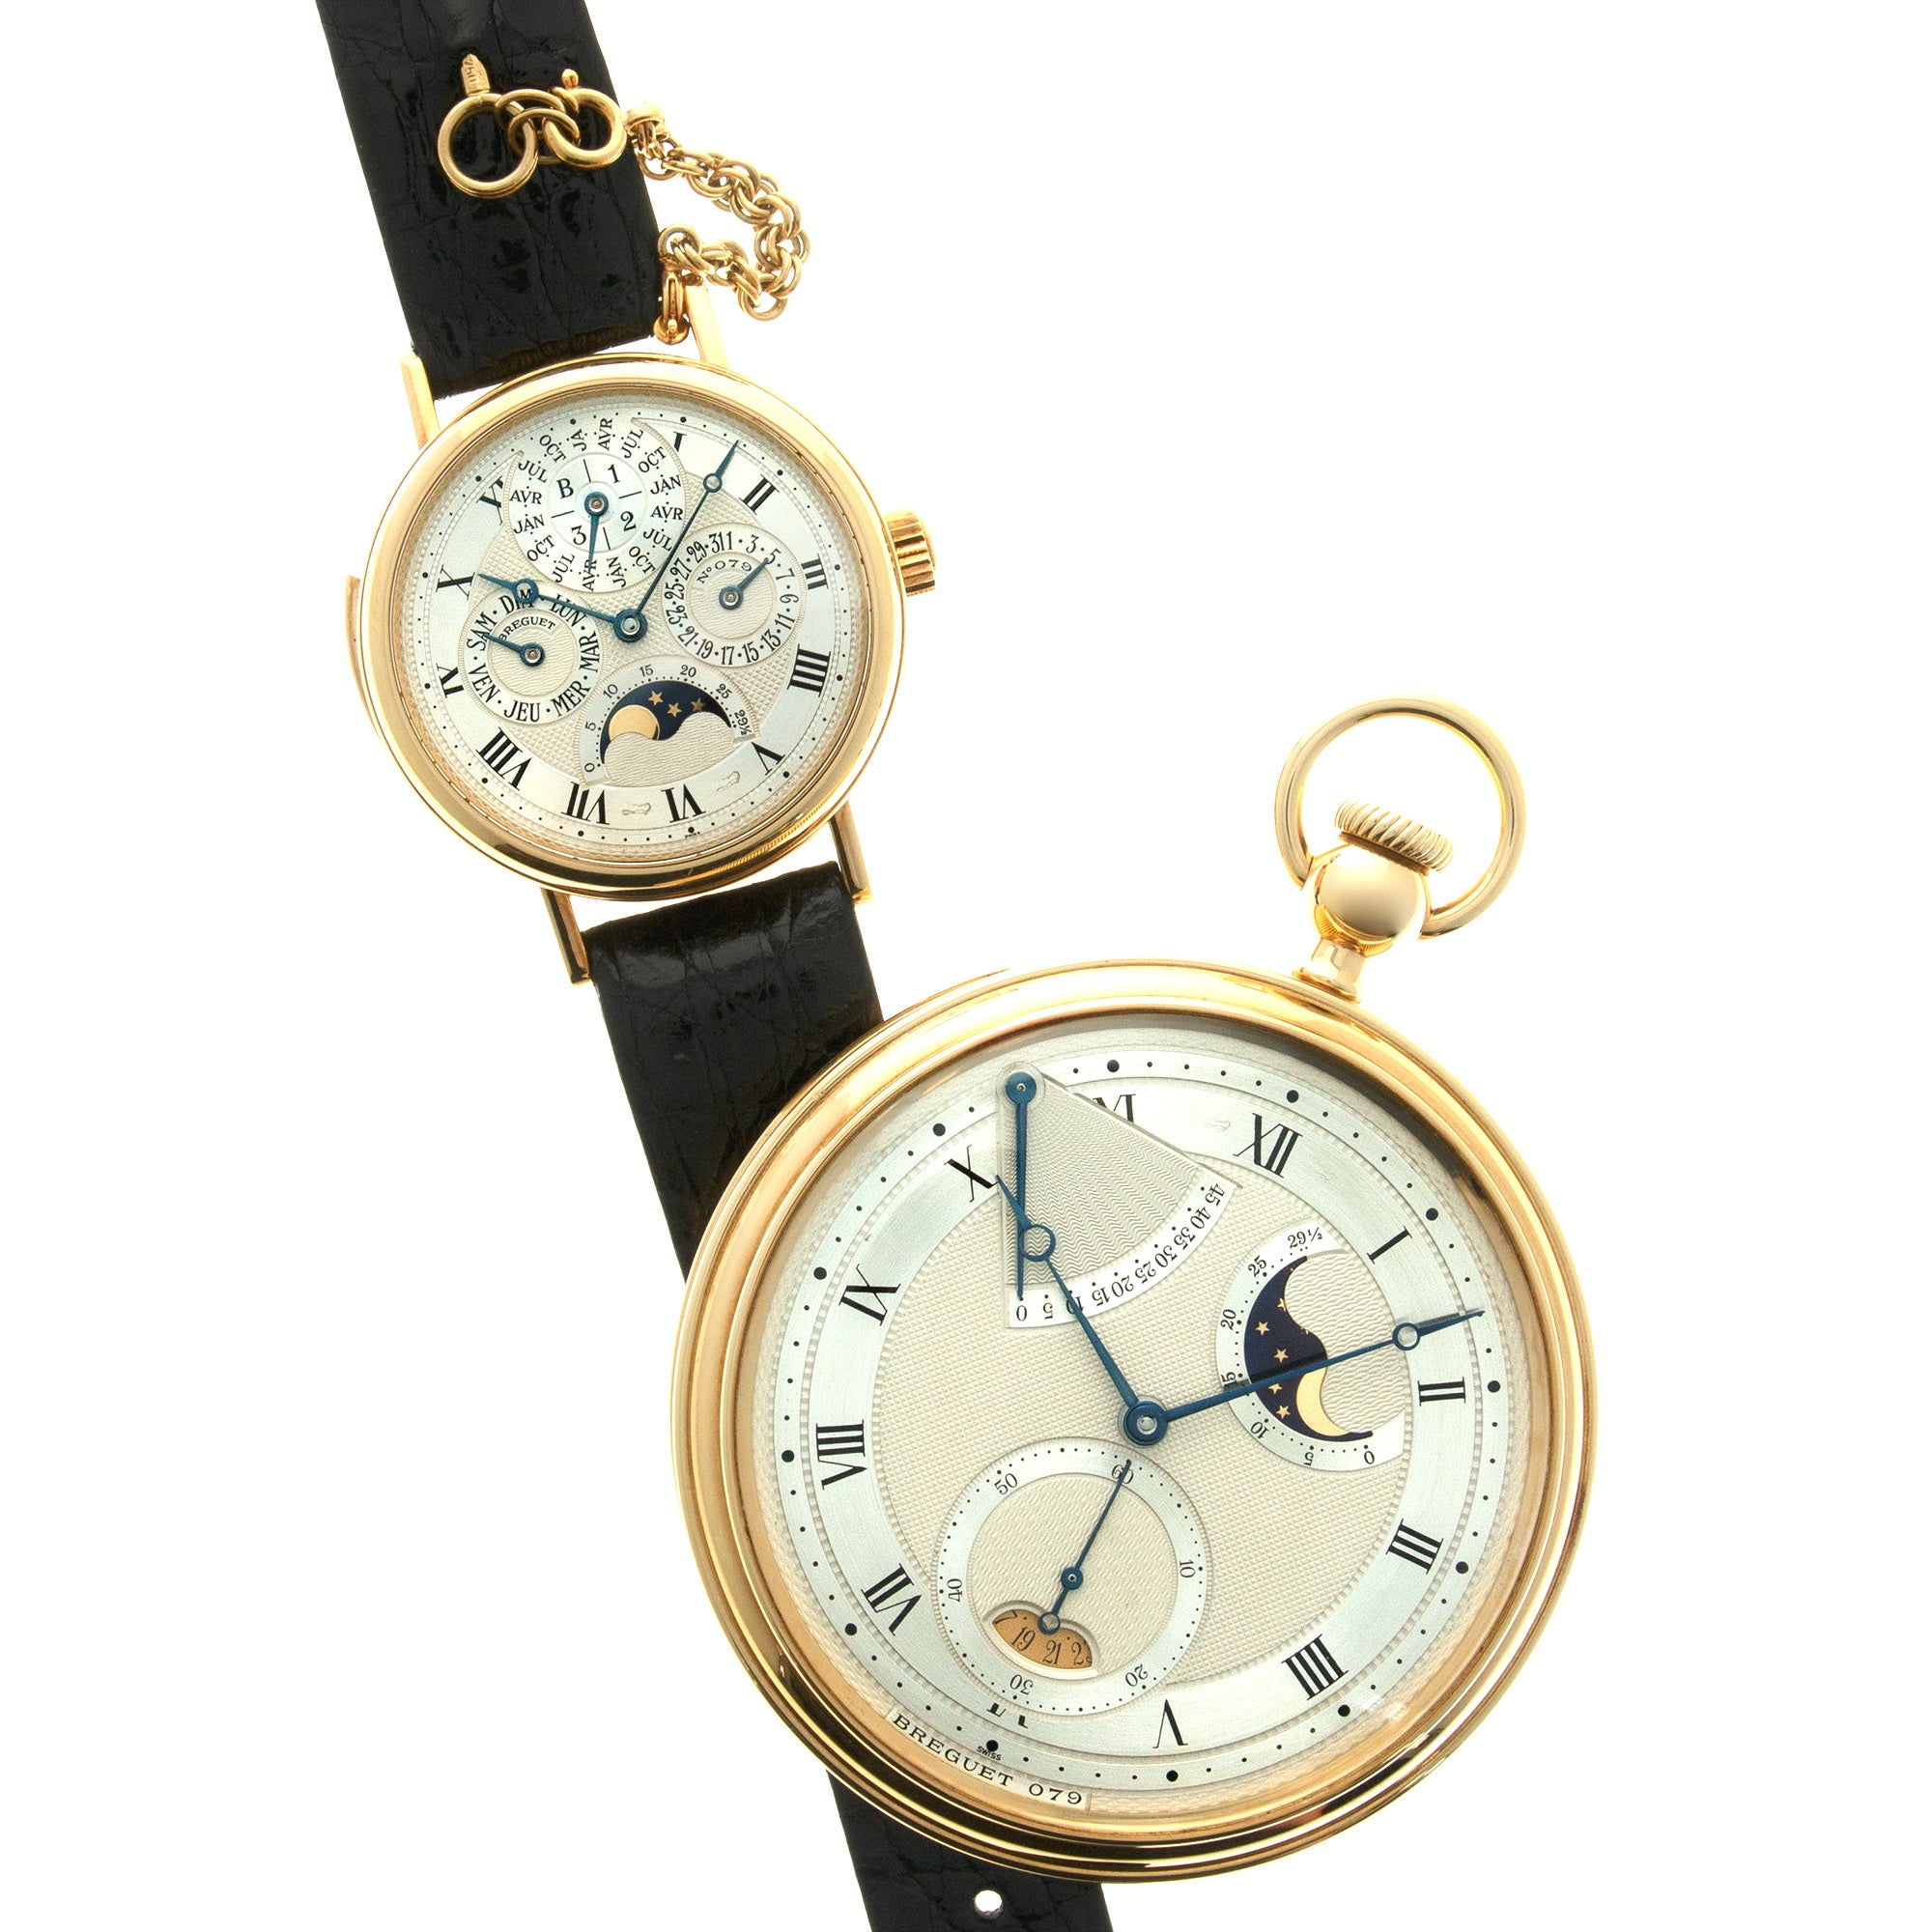 Breguet - Breguet Yellow Gold Minute Repeating Perpetual Subscription Set - The Keystone Watches